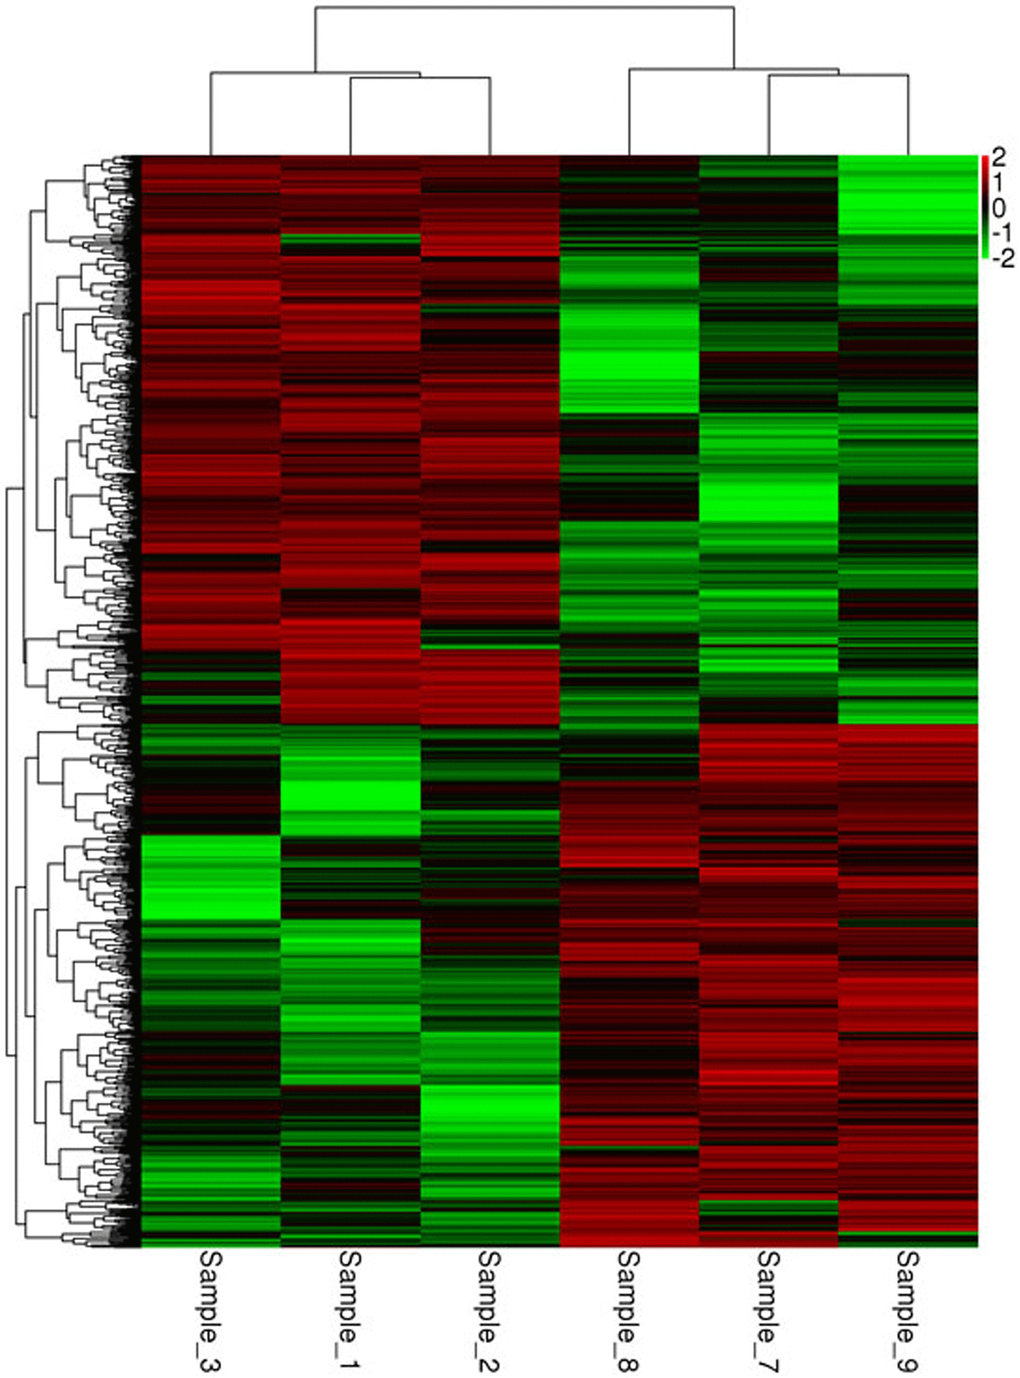 Heat map of the mRNA clustering analysis of macaque mononuclear cells from juvenile and old groups